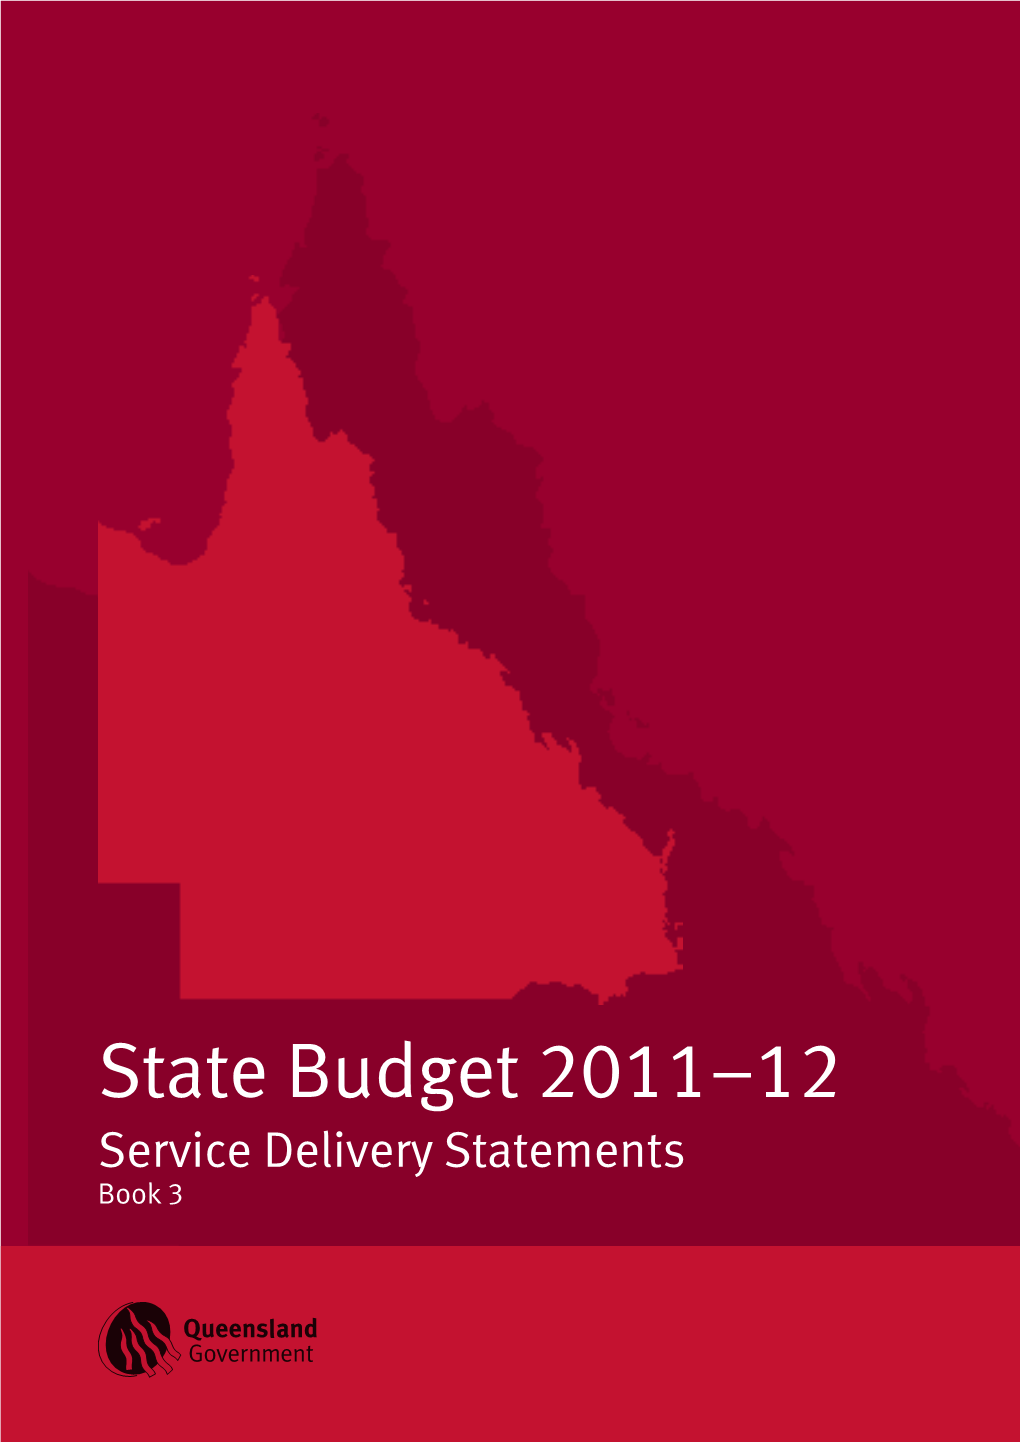 Service Delivery Statements (Queensland State Budget 2011-12)